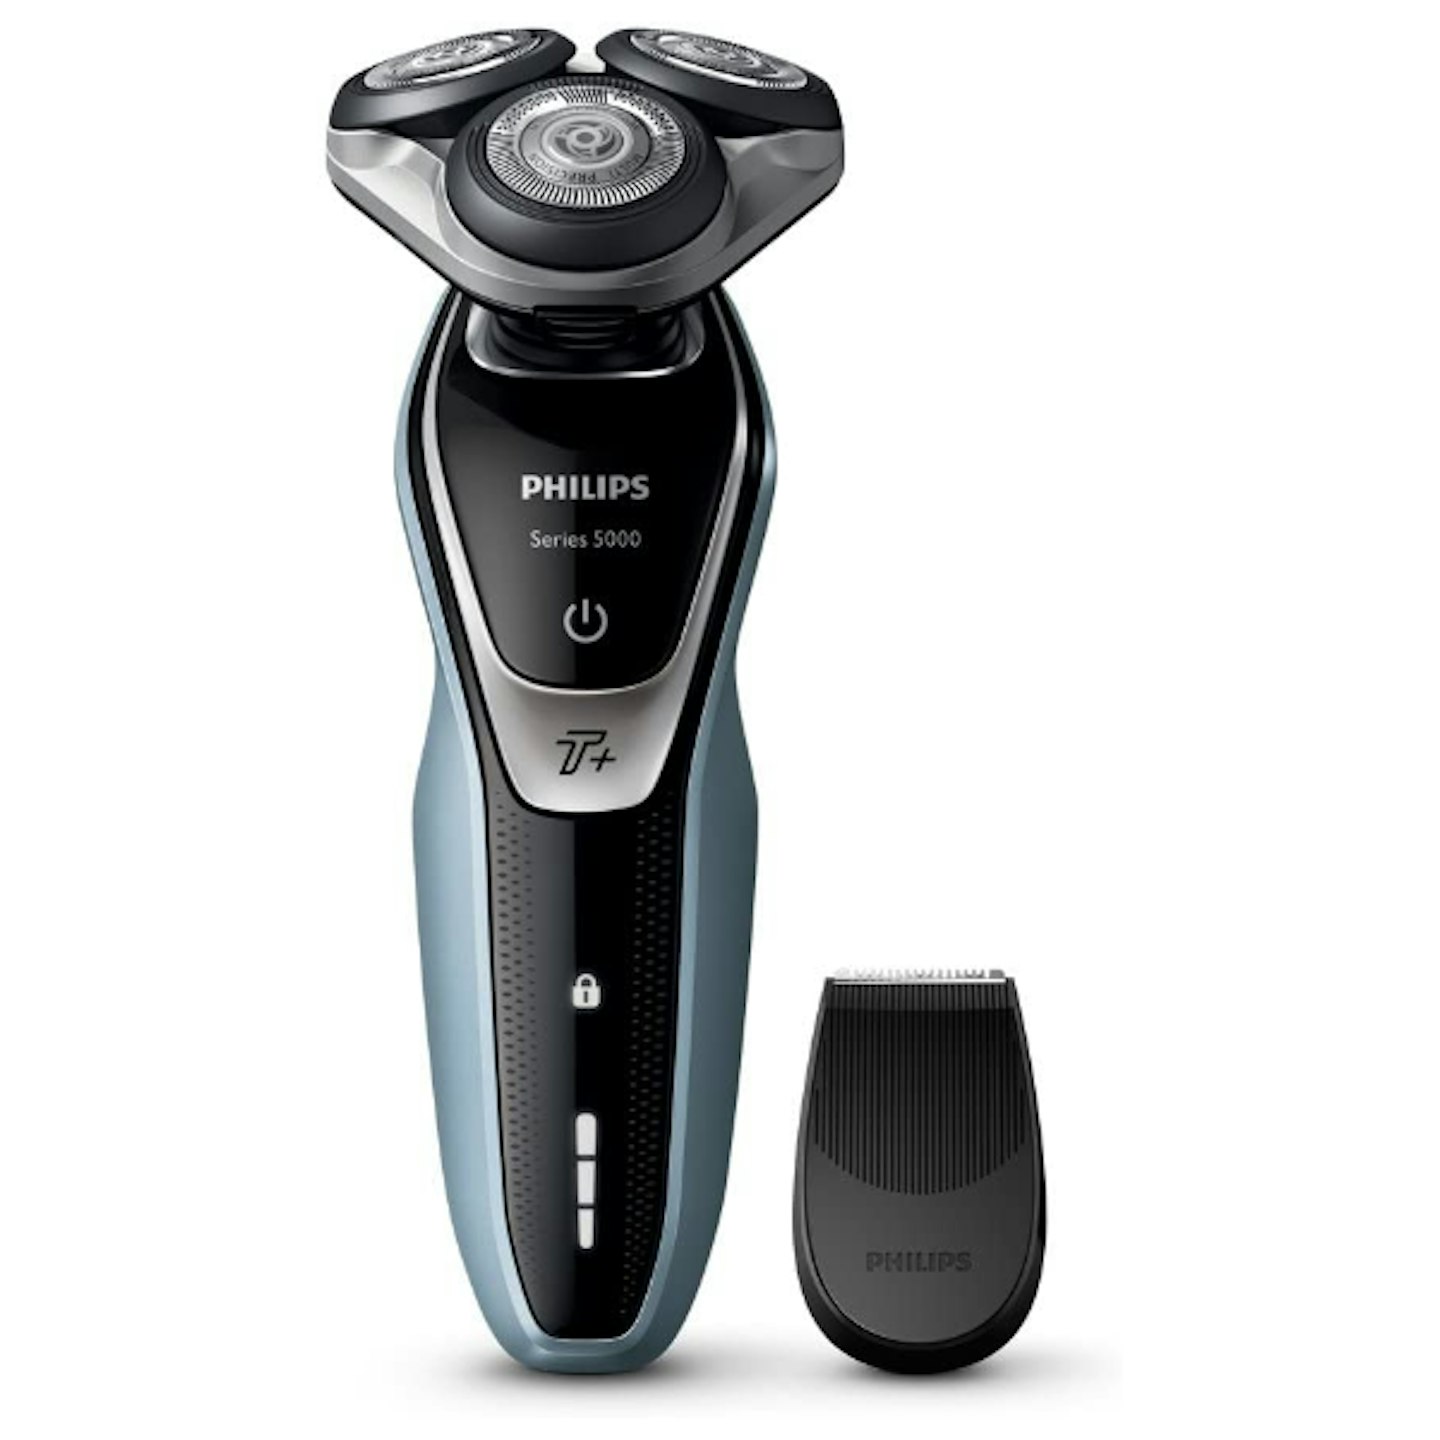 Philips Series 5000 Wet and Dry Men's Electric Shaver